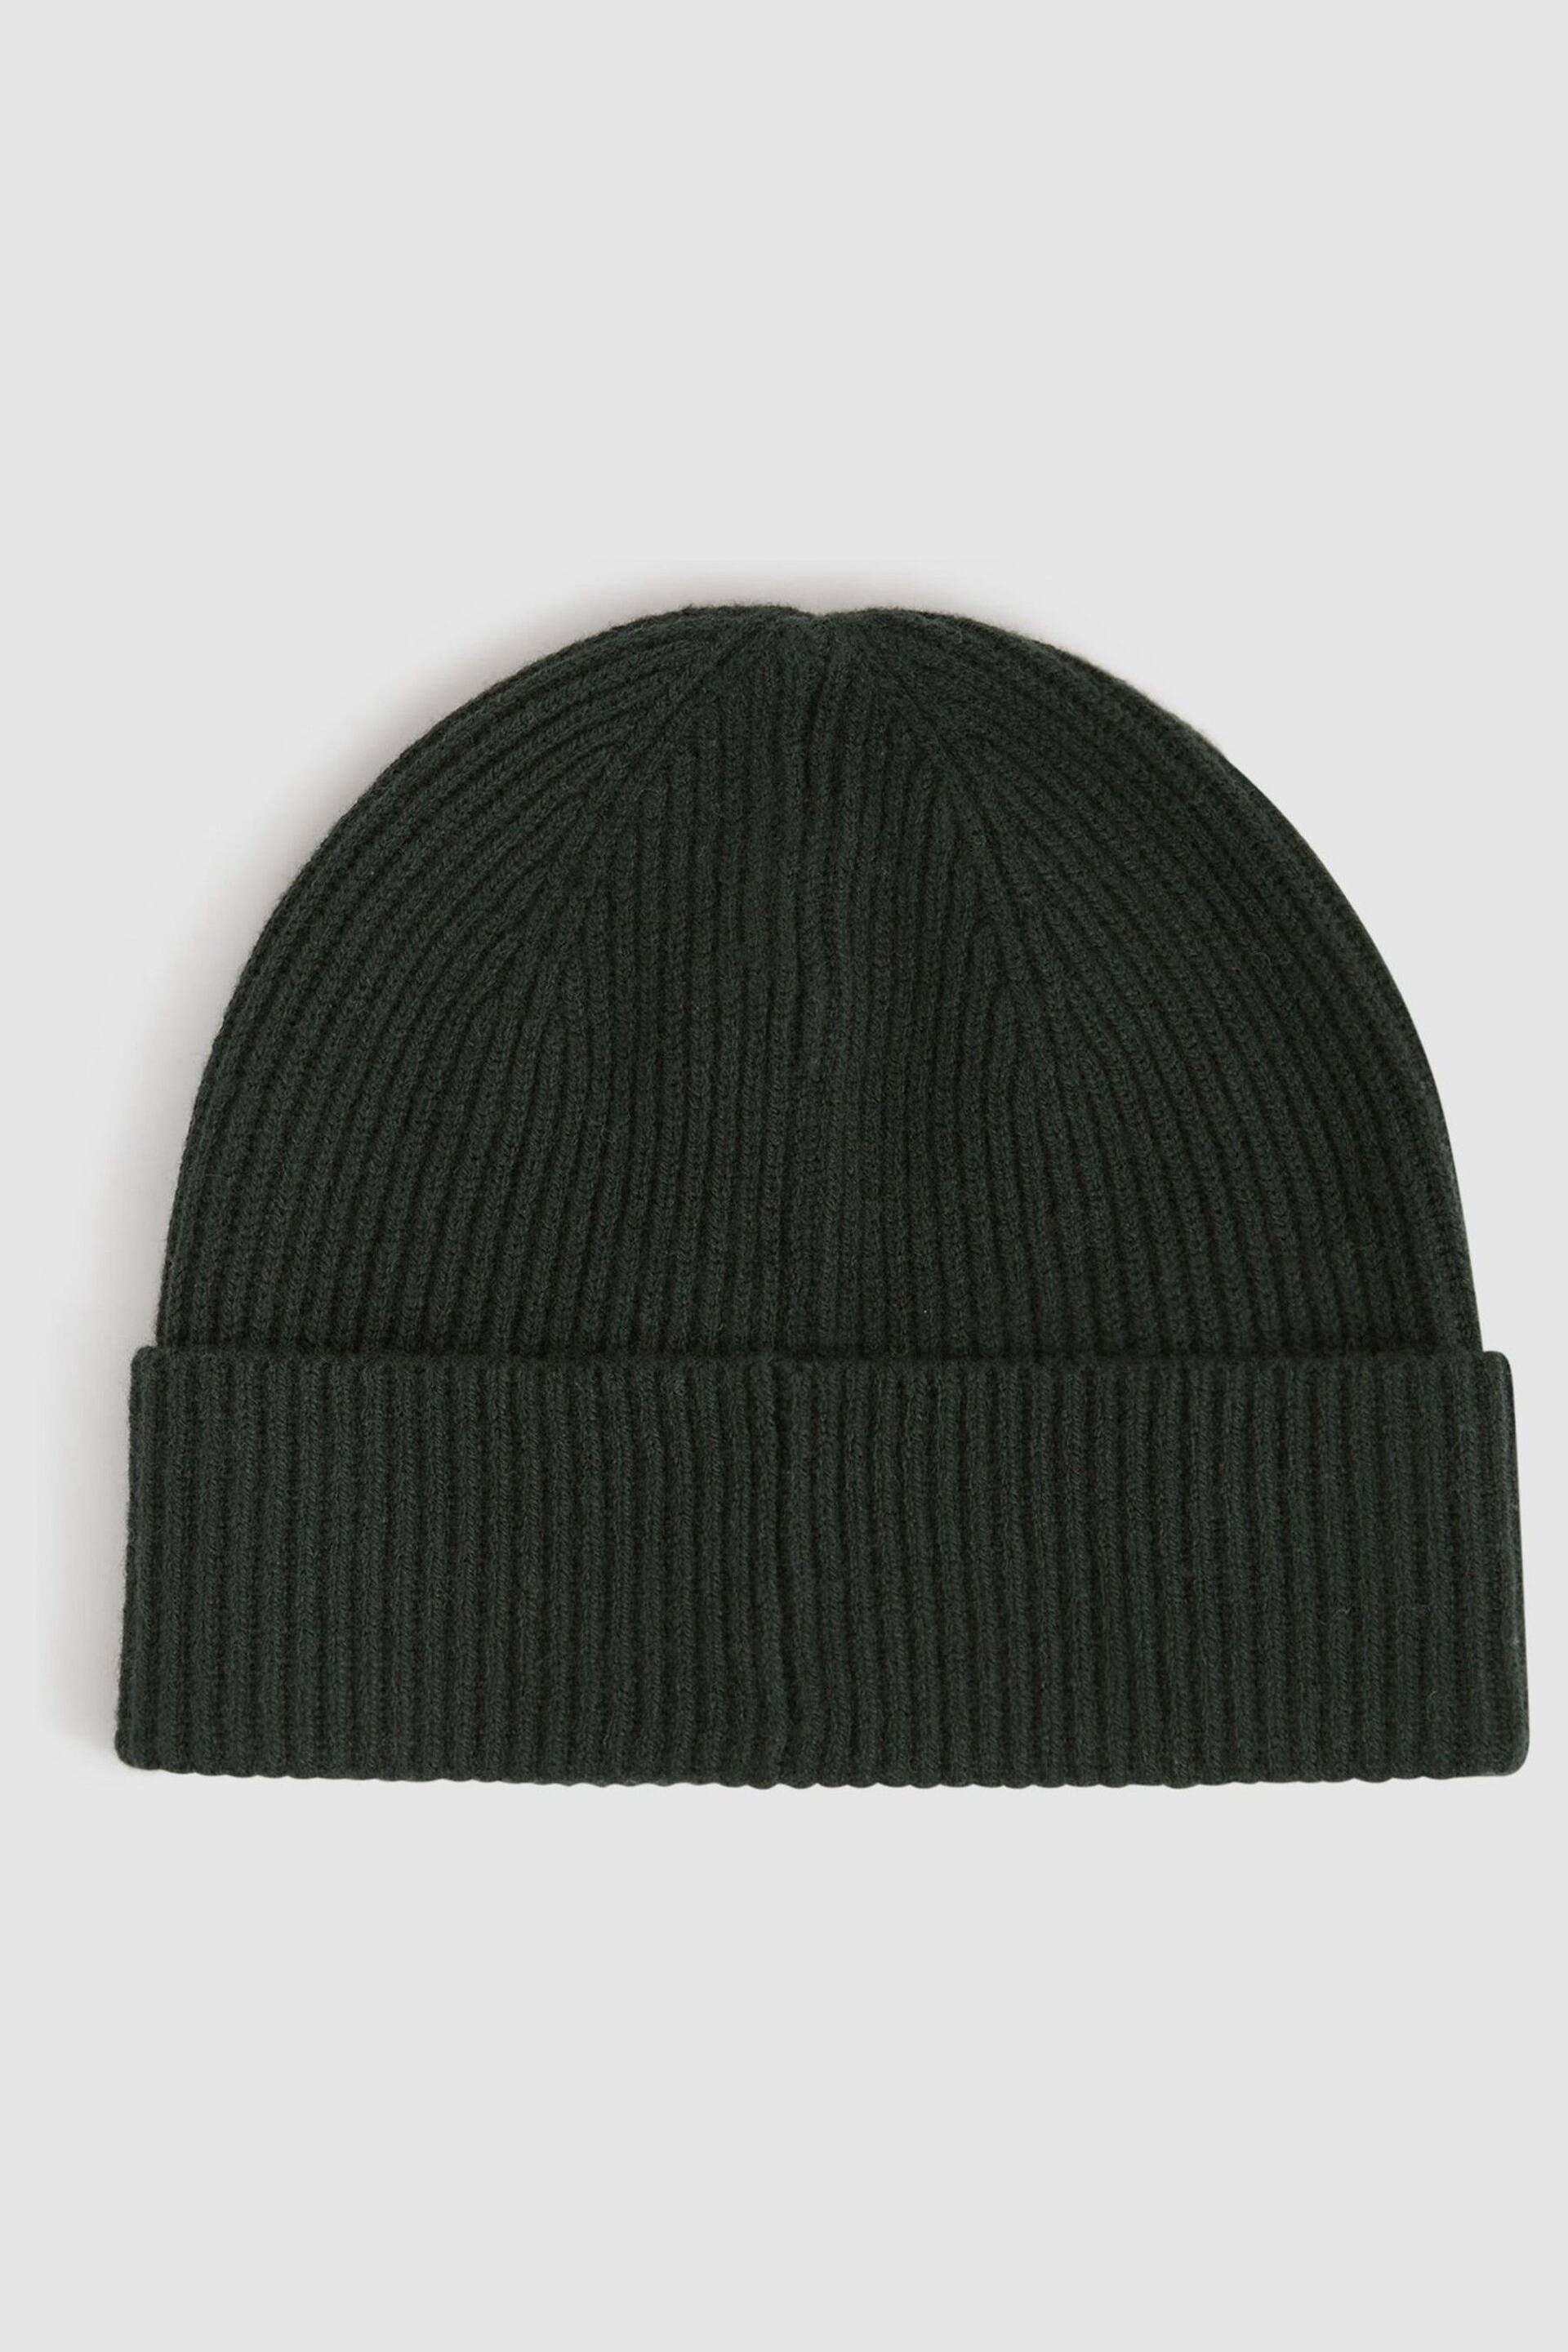 Reiss Forest Green Chaise Merino Wool Ribbed Beanie Hat - Image 3 of 4